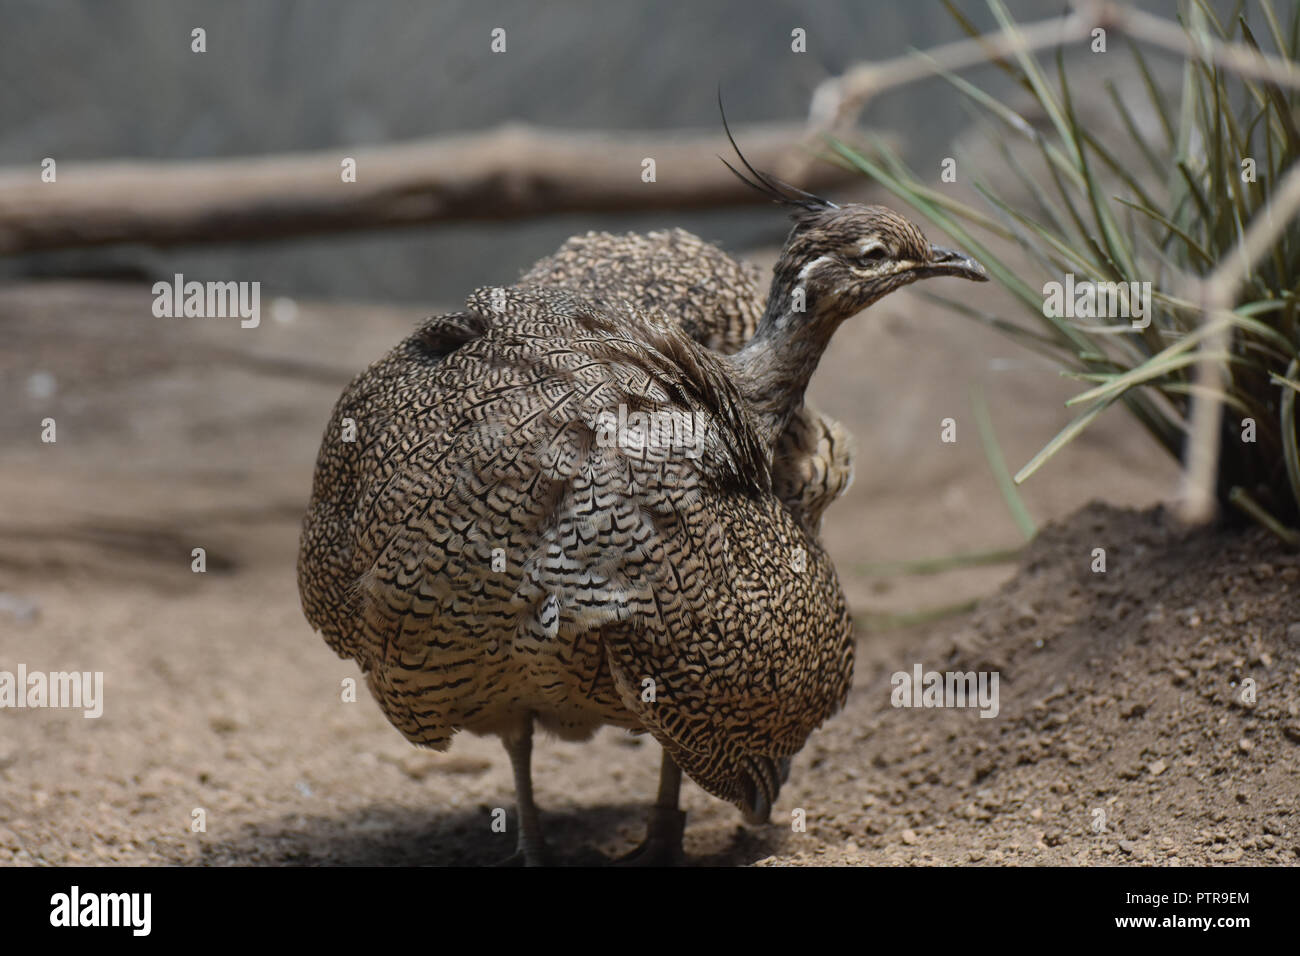 Elegant crested tinamou bird with fluffed feathers. Stock Photo